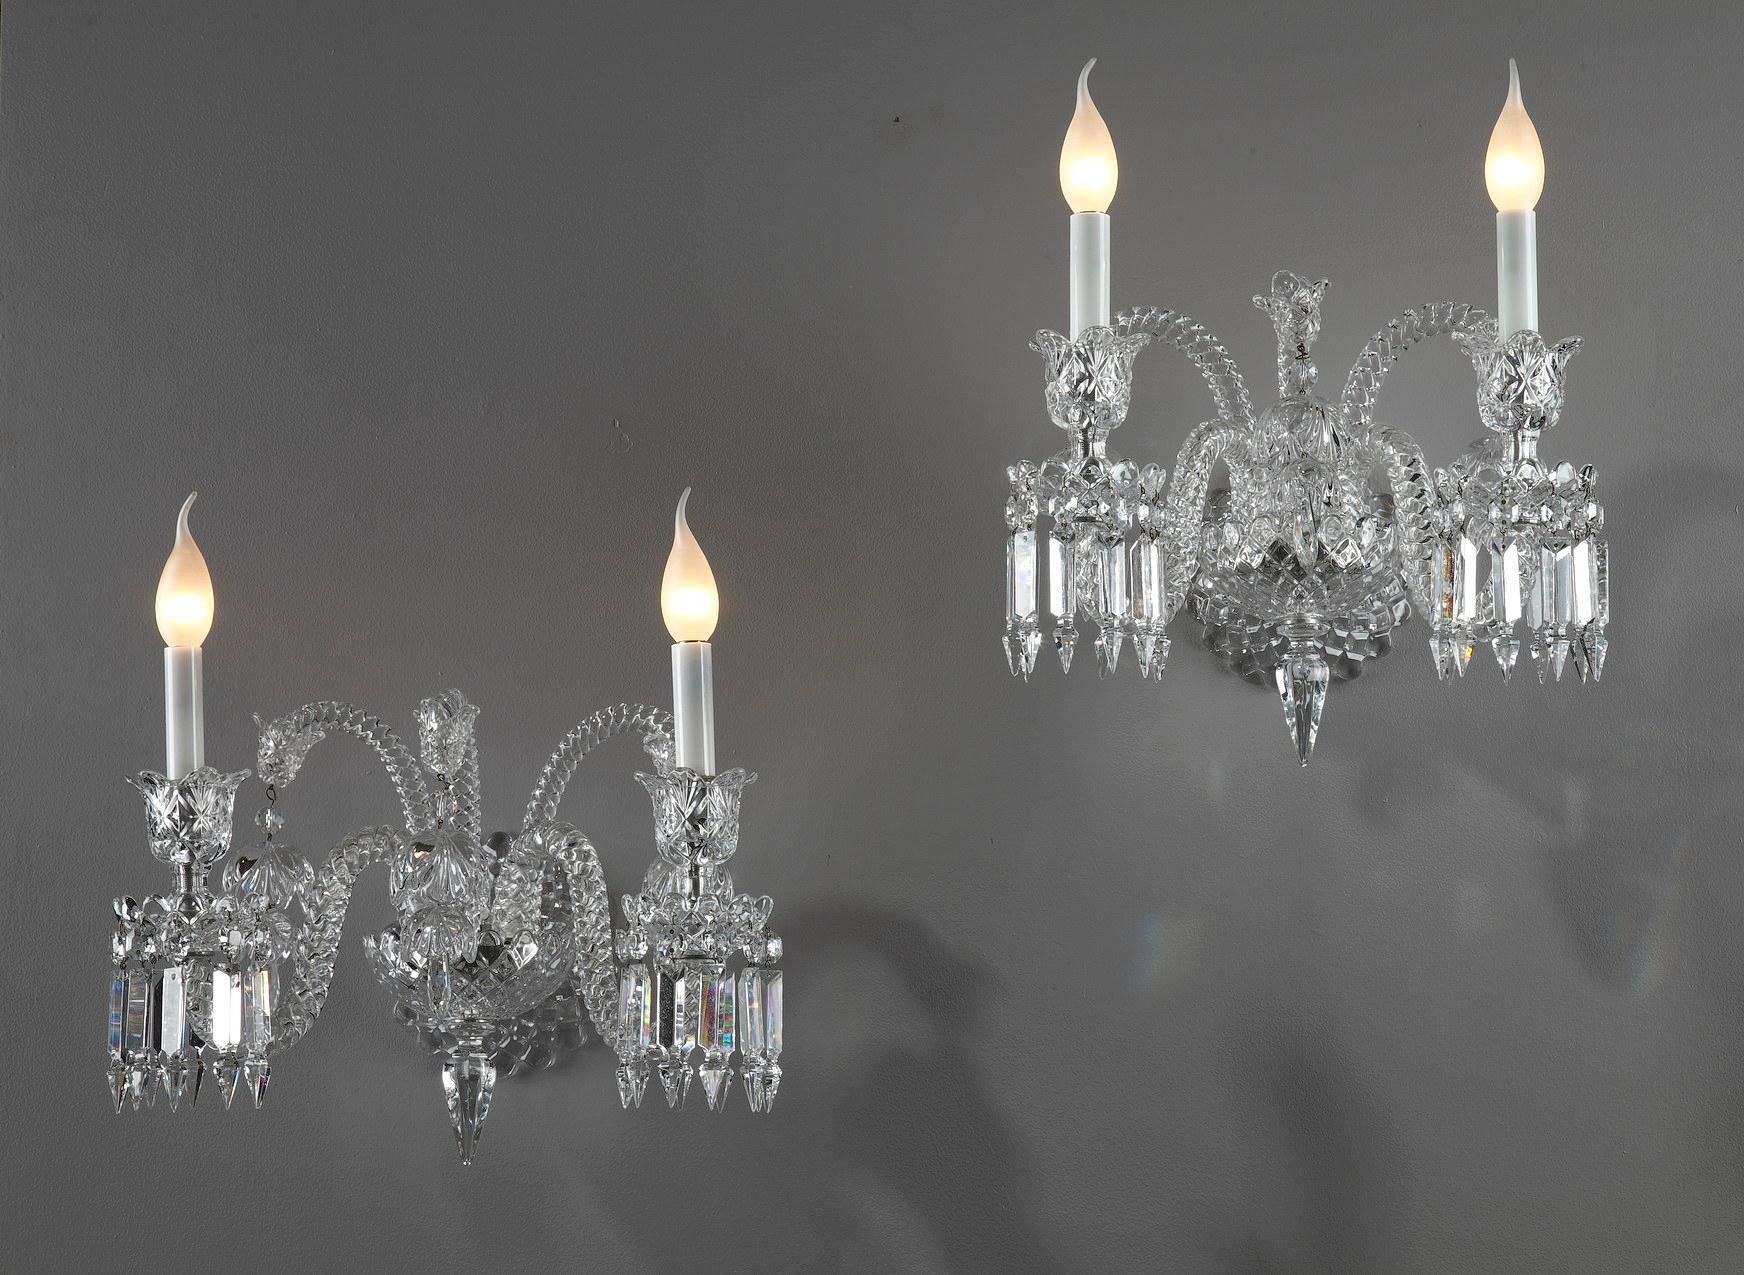 Pair of Baccarat crystal sconces with two arms of lights. Each sconce is decorated with geometric pendants. Each one has three purely decorative arms decorated with a large crystal flower pendant. The shafts are twisted. The sconces are signed